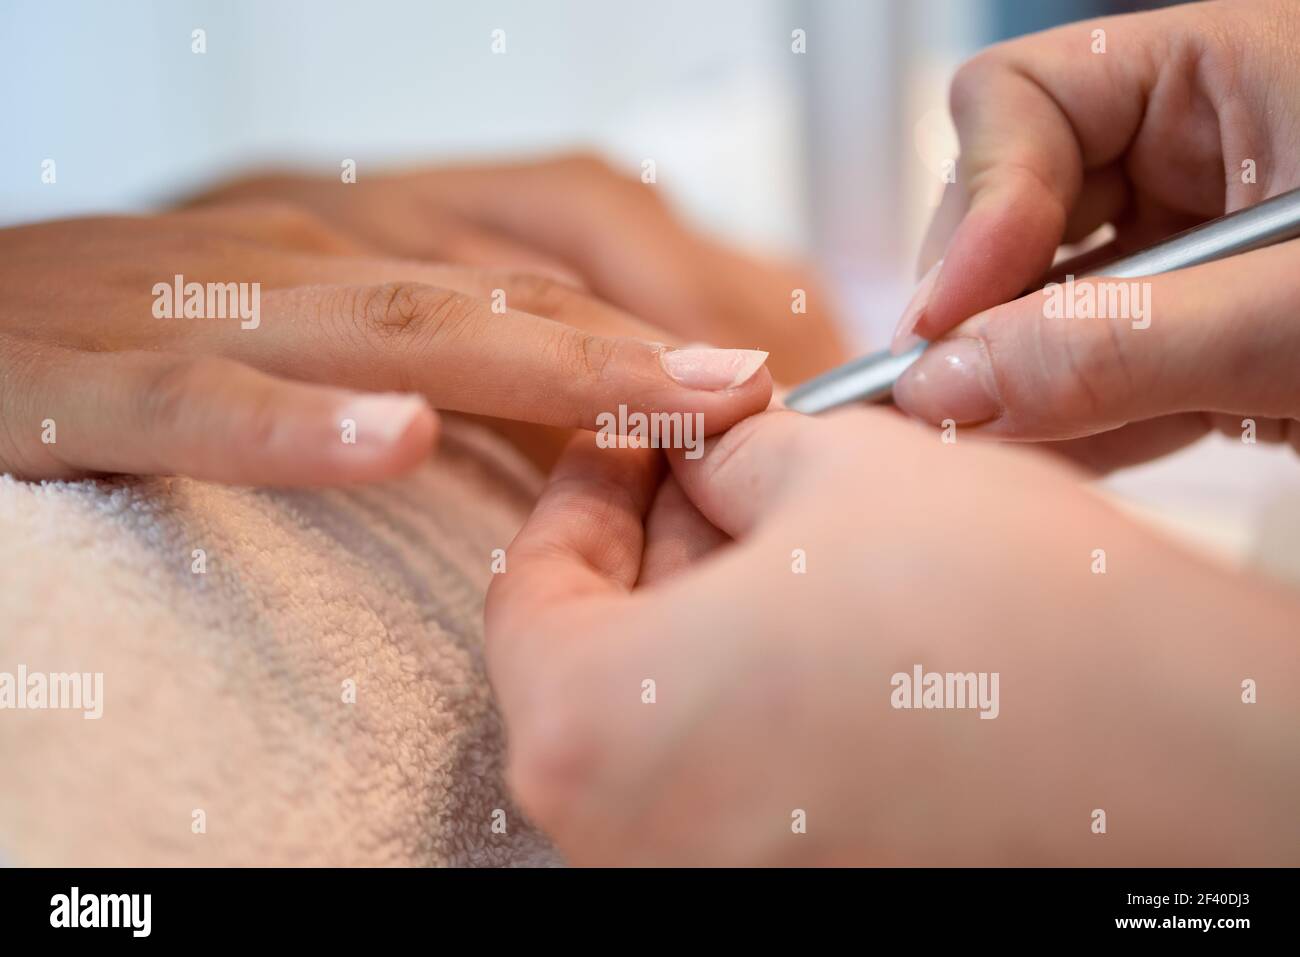 Woman with deteriorated nails in a salon receiving a manicure by a beautician with nail file. Stock Photo